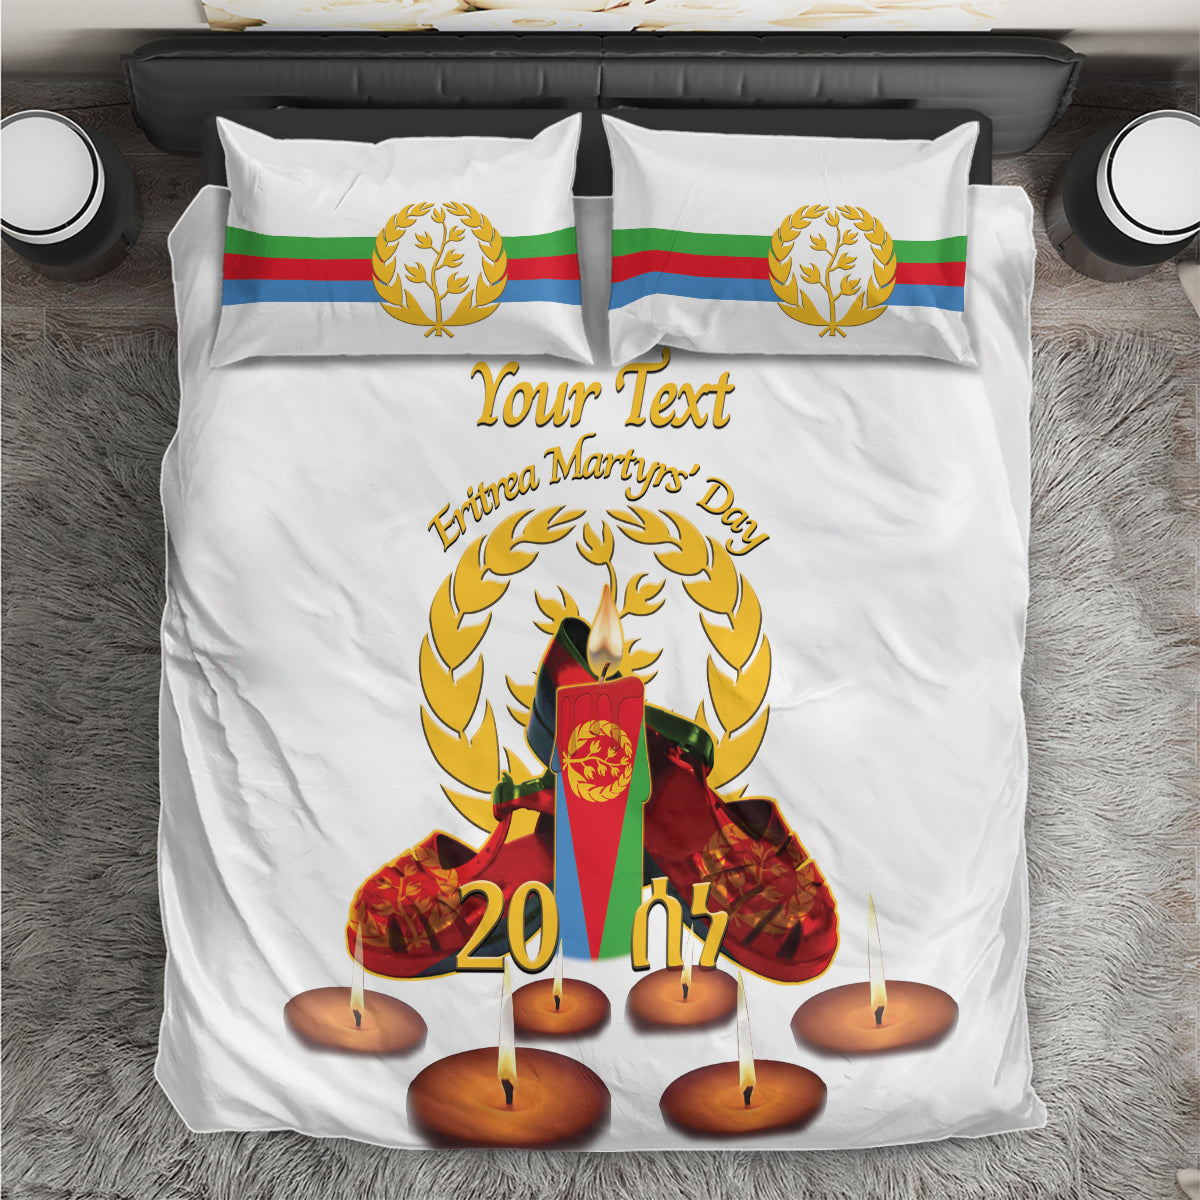 Custom Eritrea Martyrs' Day Bedding Set 20 June Shida Shoes With Candles - White